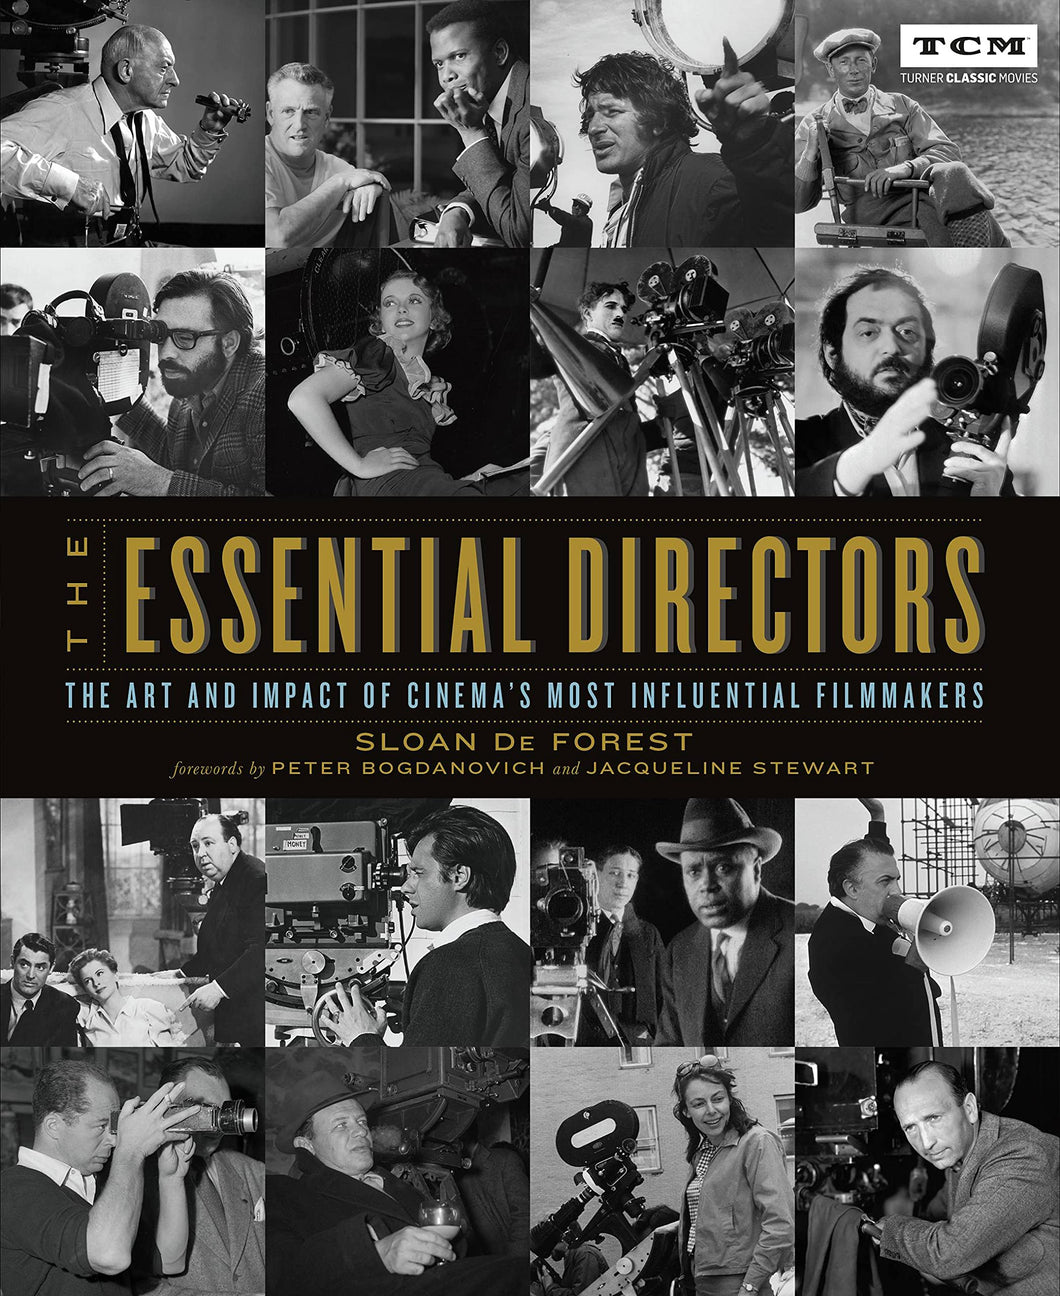 Sloan De Forest - The Essential Directors: The Art and Impact of Cinema's Most Influential Filmmakers